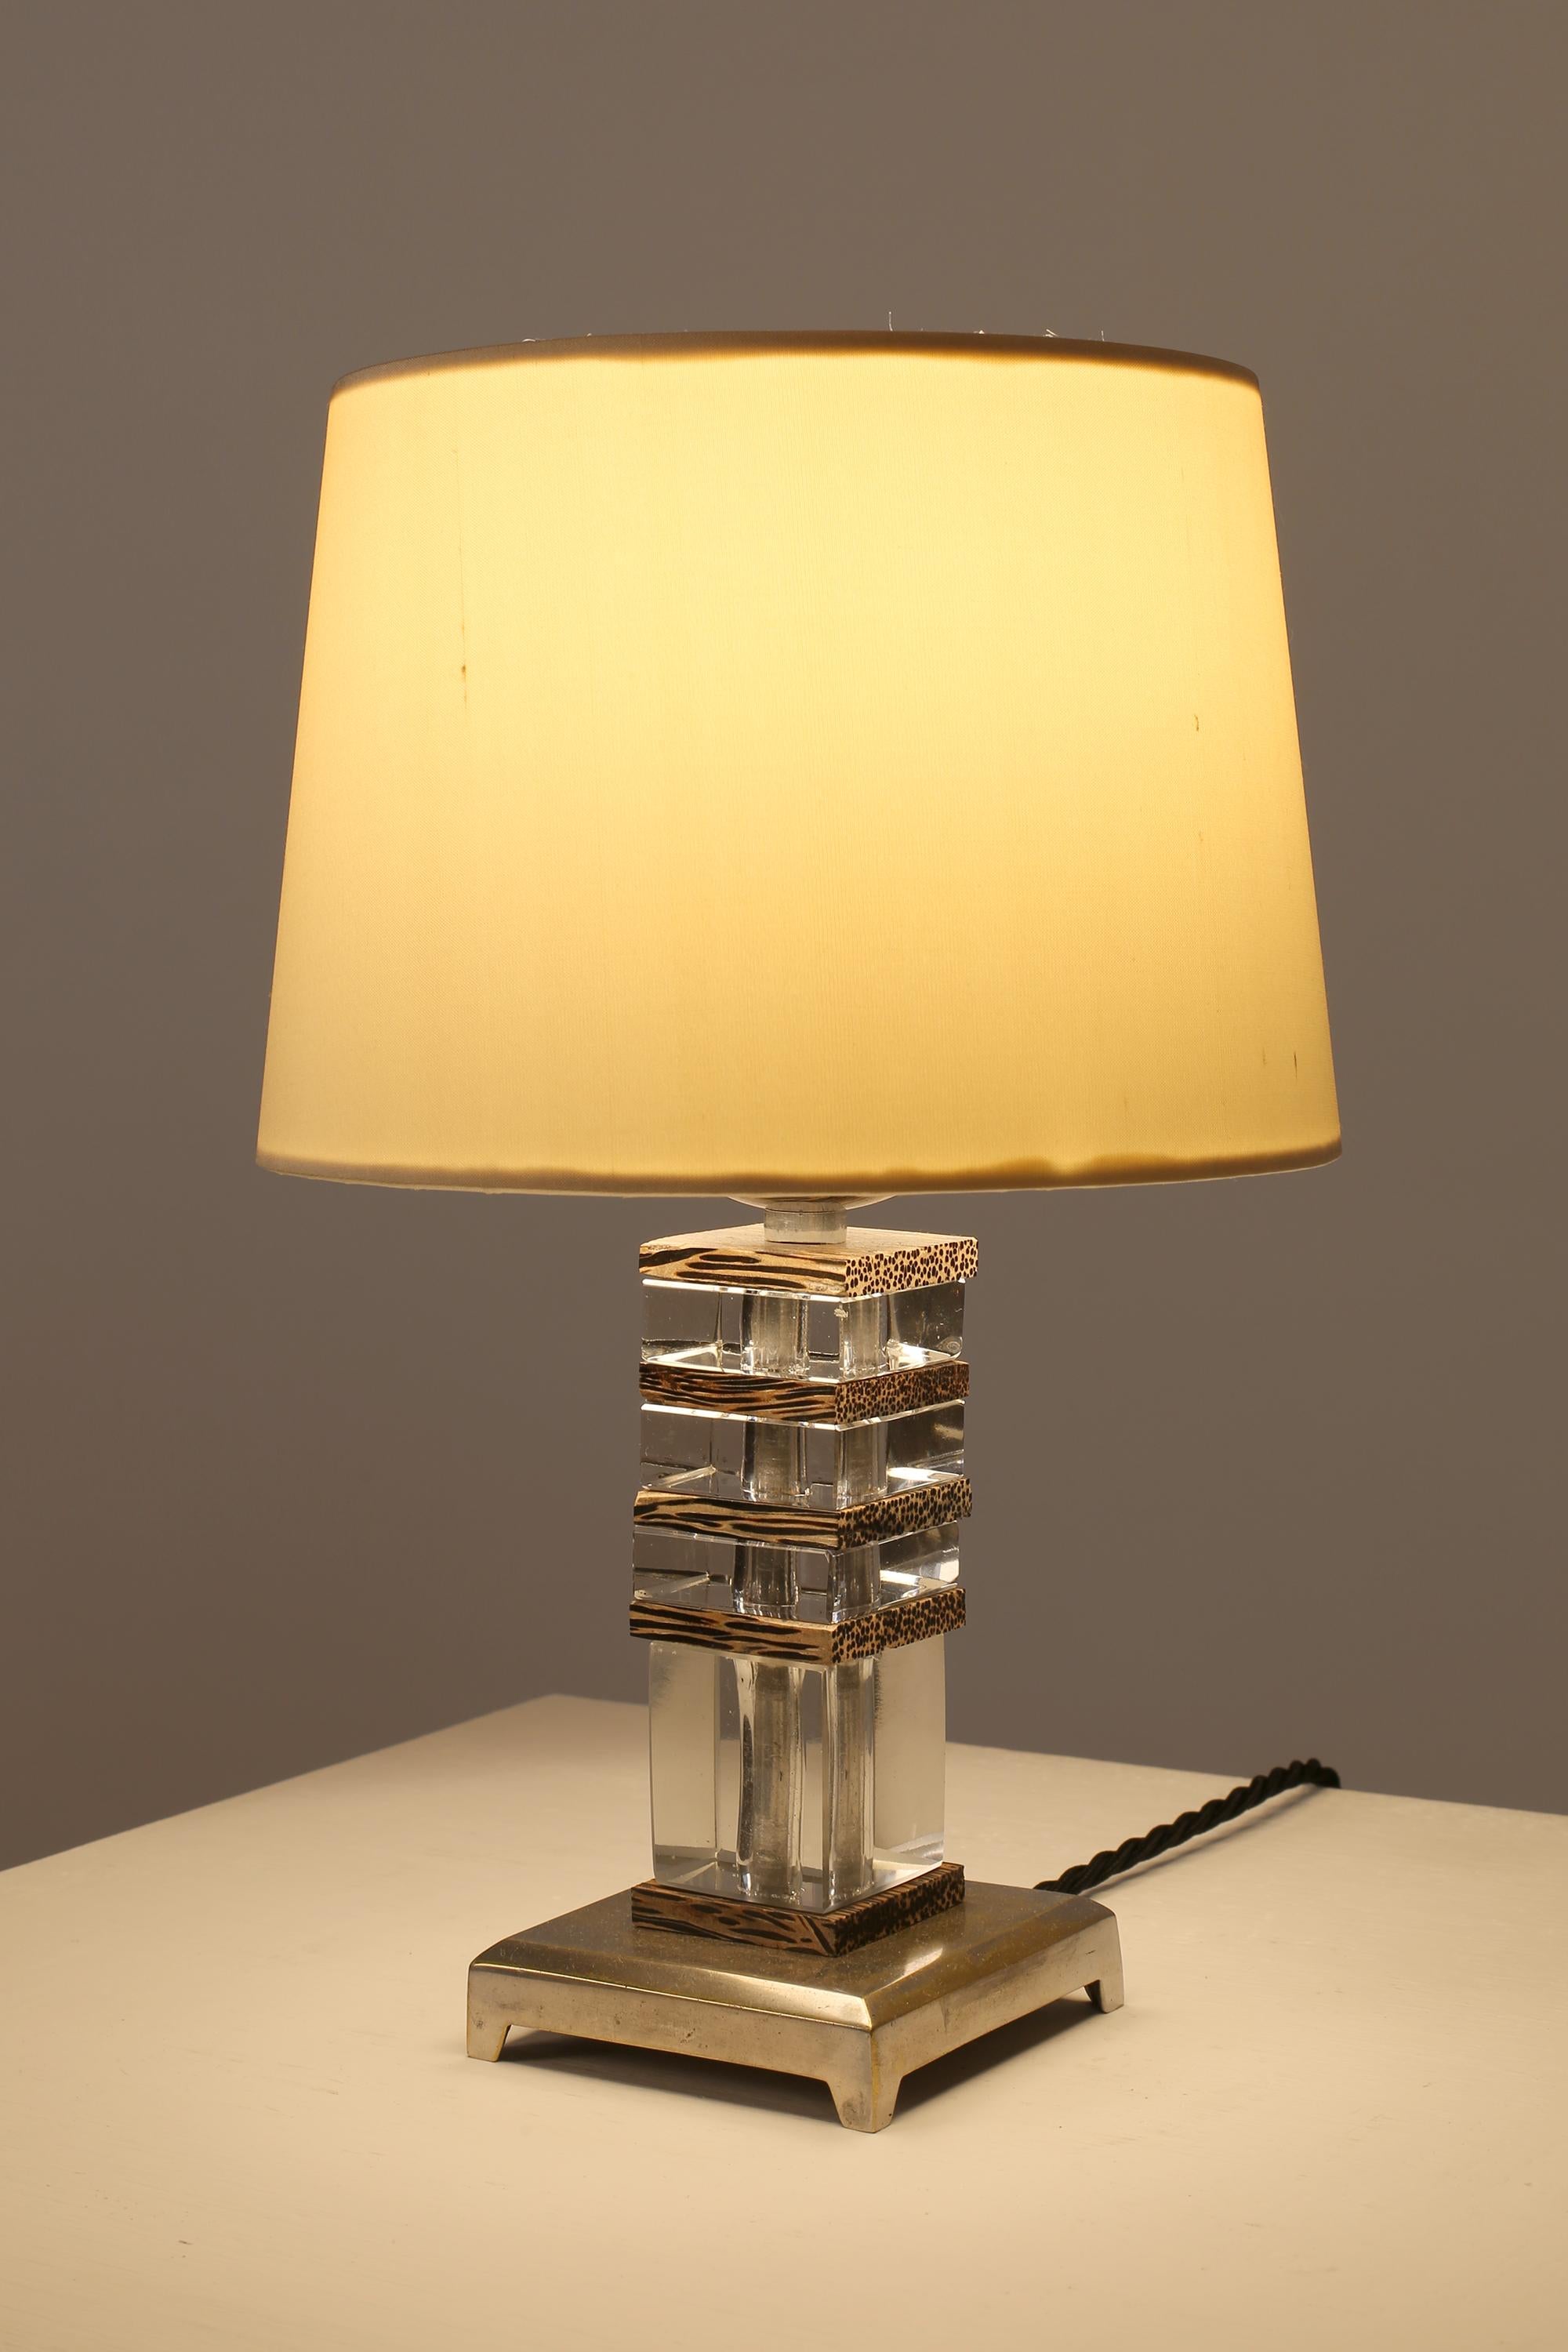 20th Century French 1930s Art Deco Table Lamp in Cut Glass Palm Wood and Nickel Plated Bronze For Sale